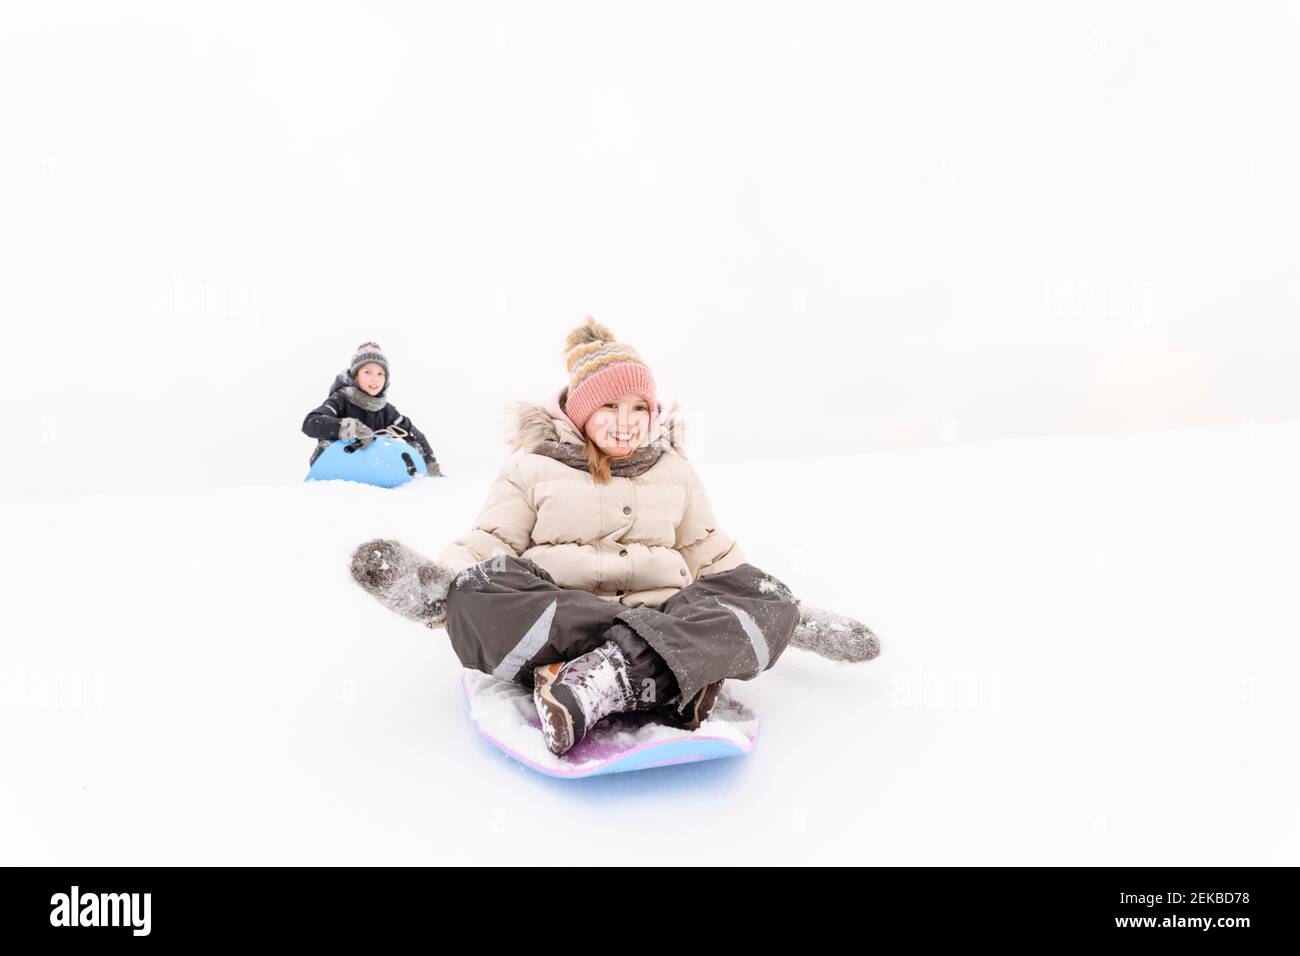 Playful siblings sledding on snow covered hill Stock Photo